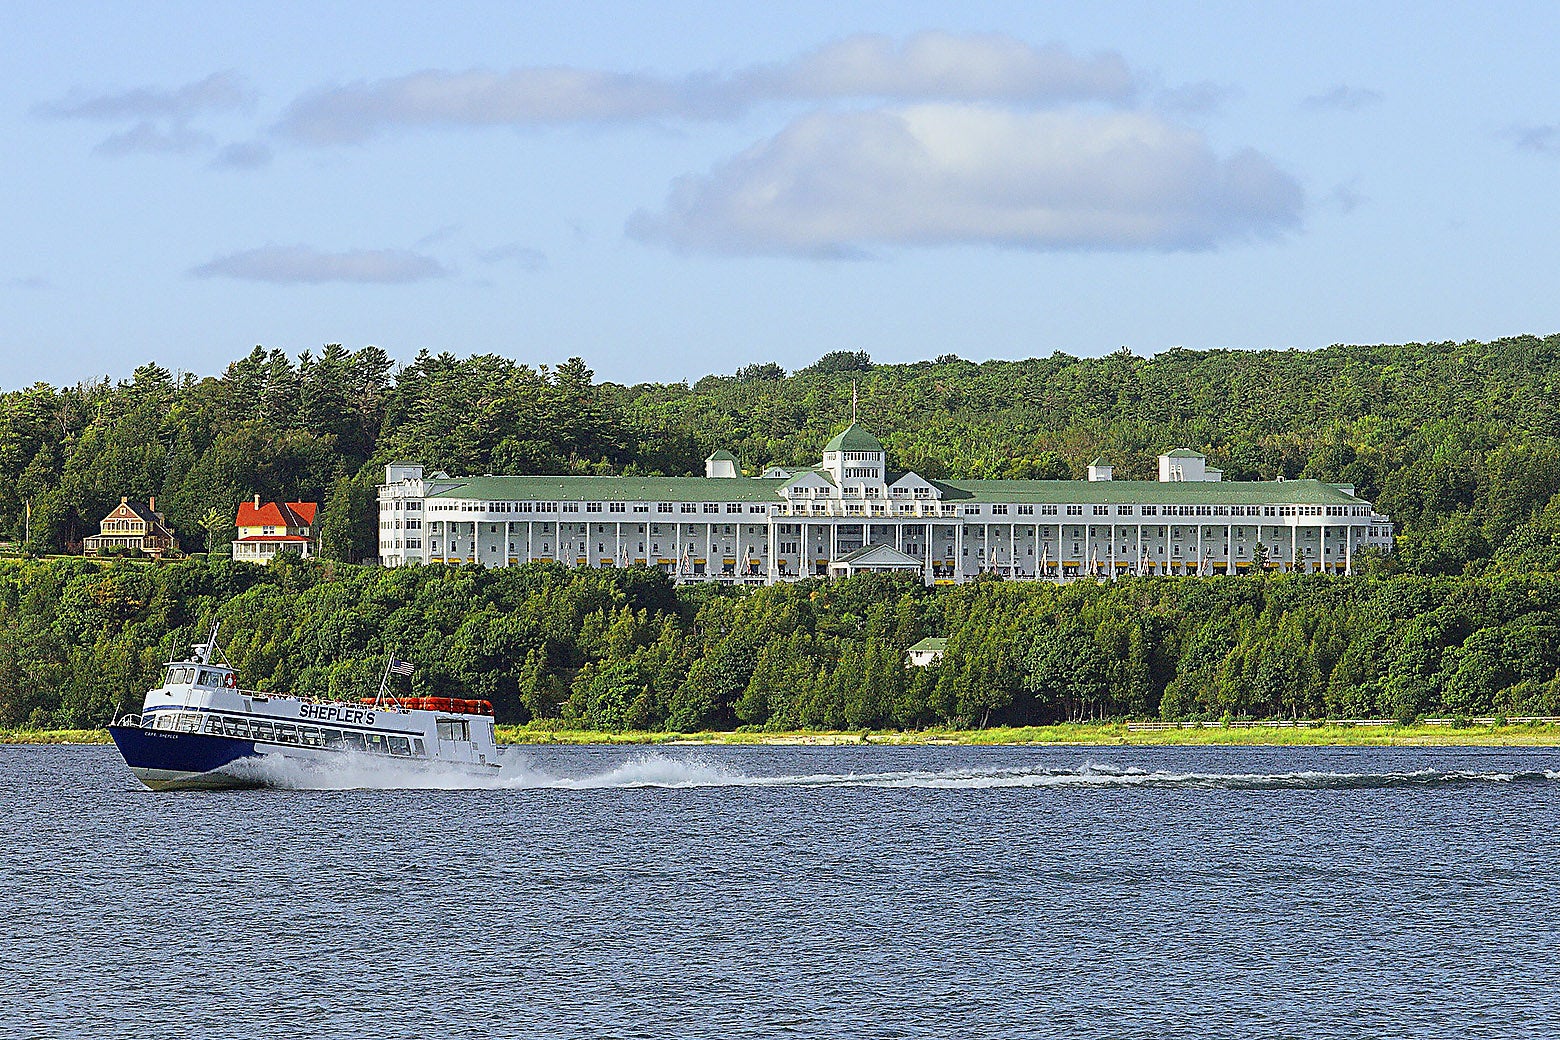 A tour boat speeds past the Grand Hotel on Mackinac Island.